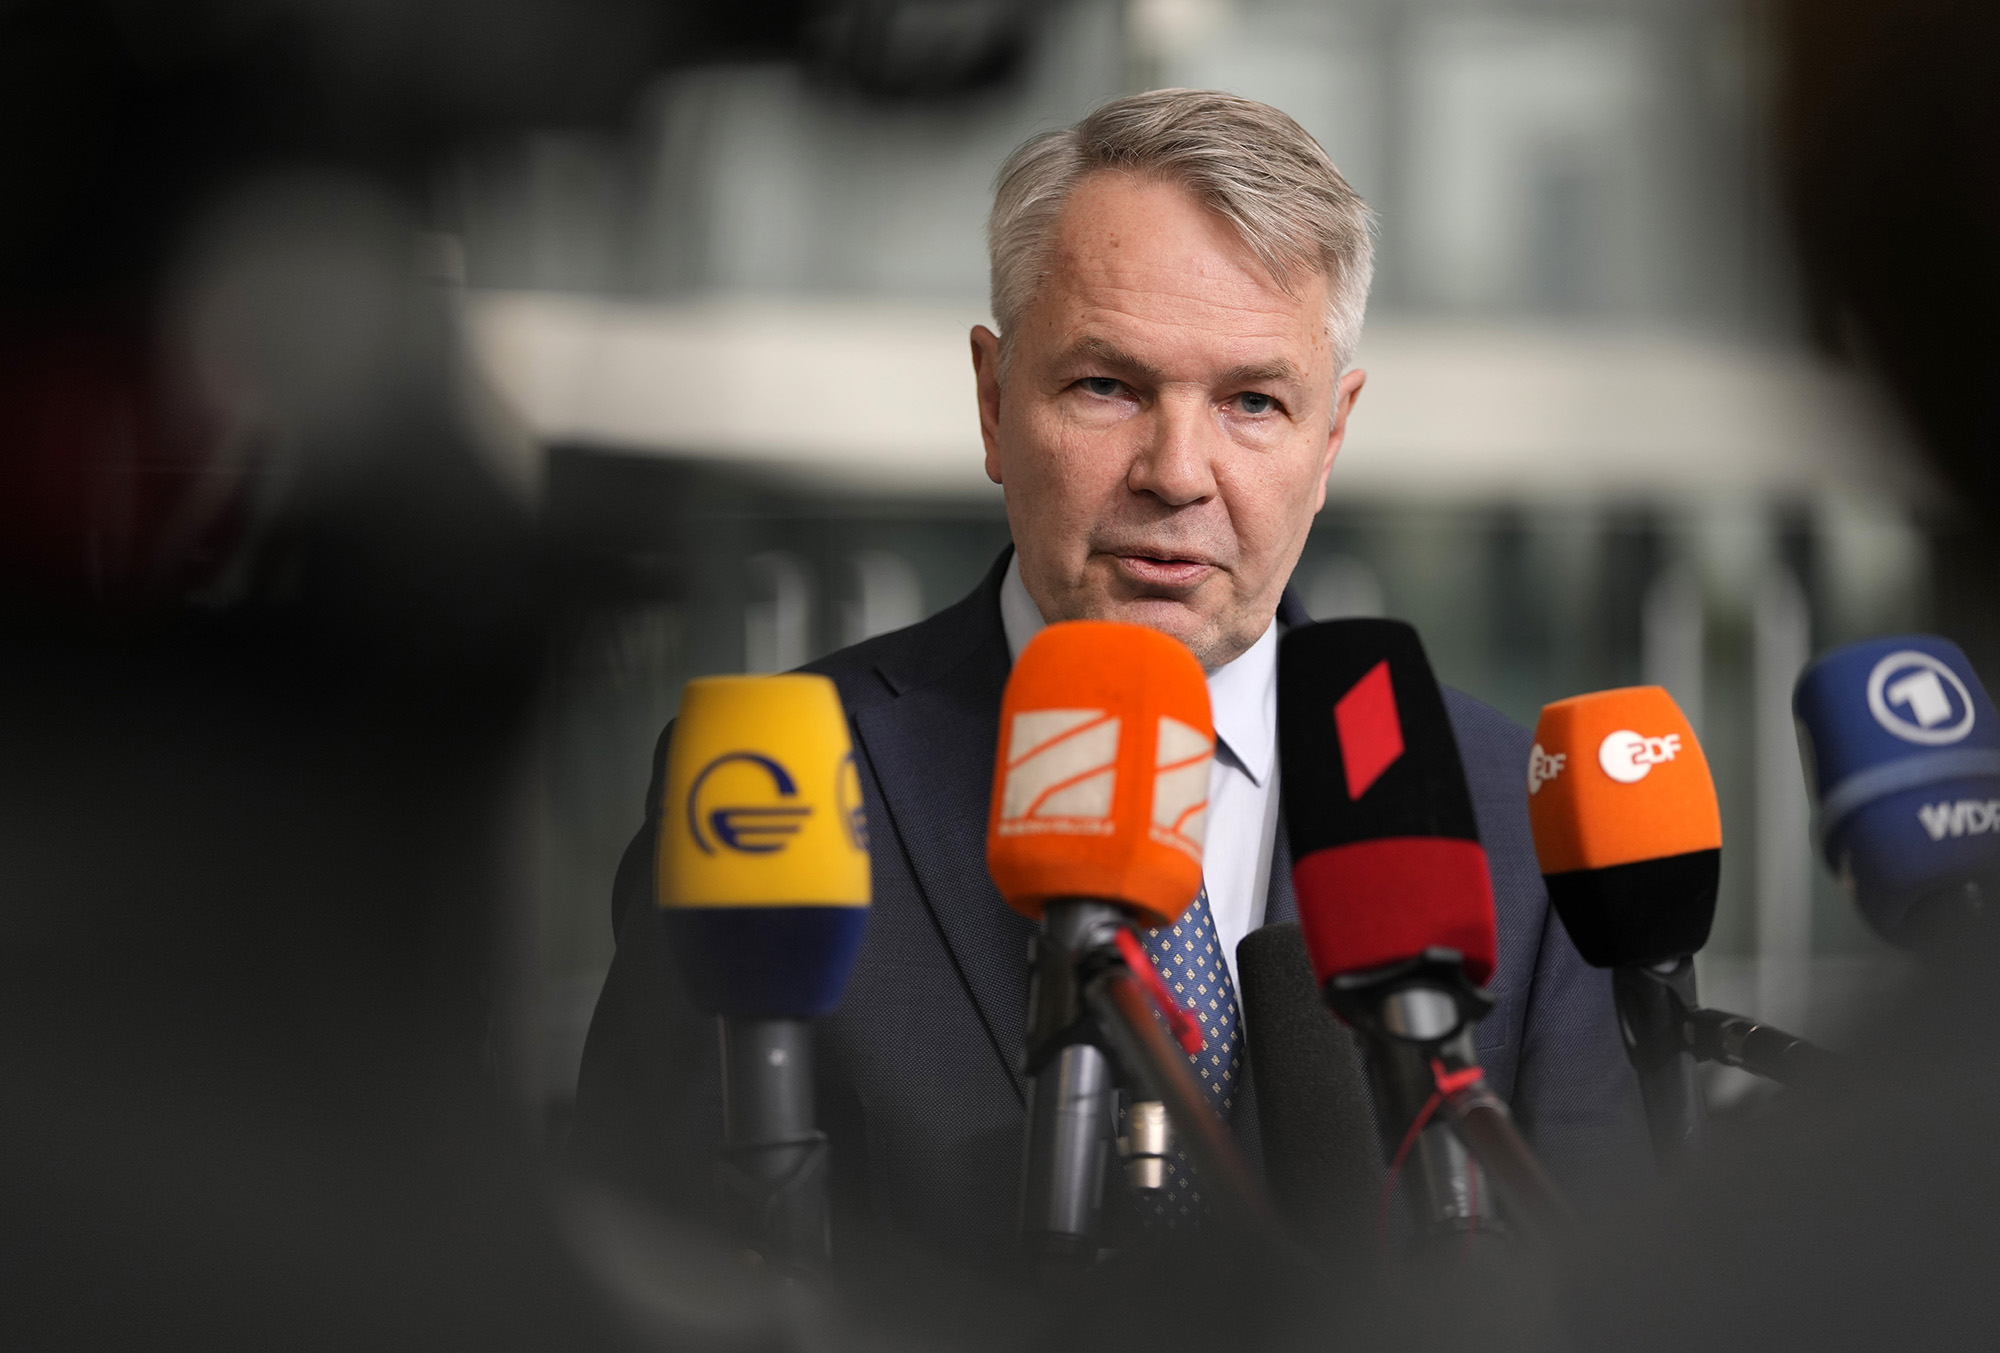 Finland's Foreign Minister Pekka Haavisto speaks with the media as he arrives for a meeting of NATO foreign ministers at NATO headquarters in Brussels, Belgium, on April 6.